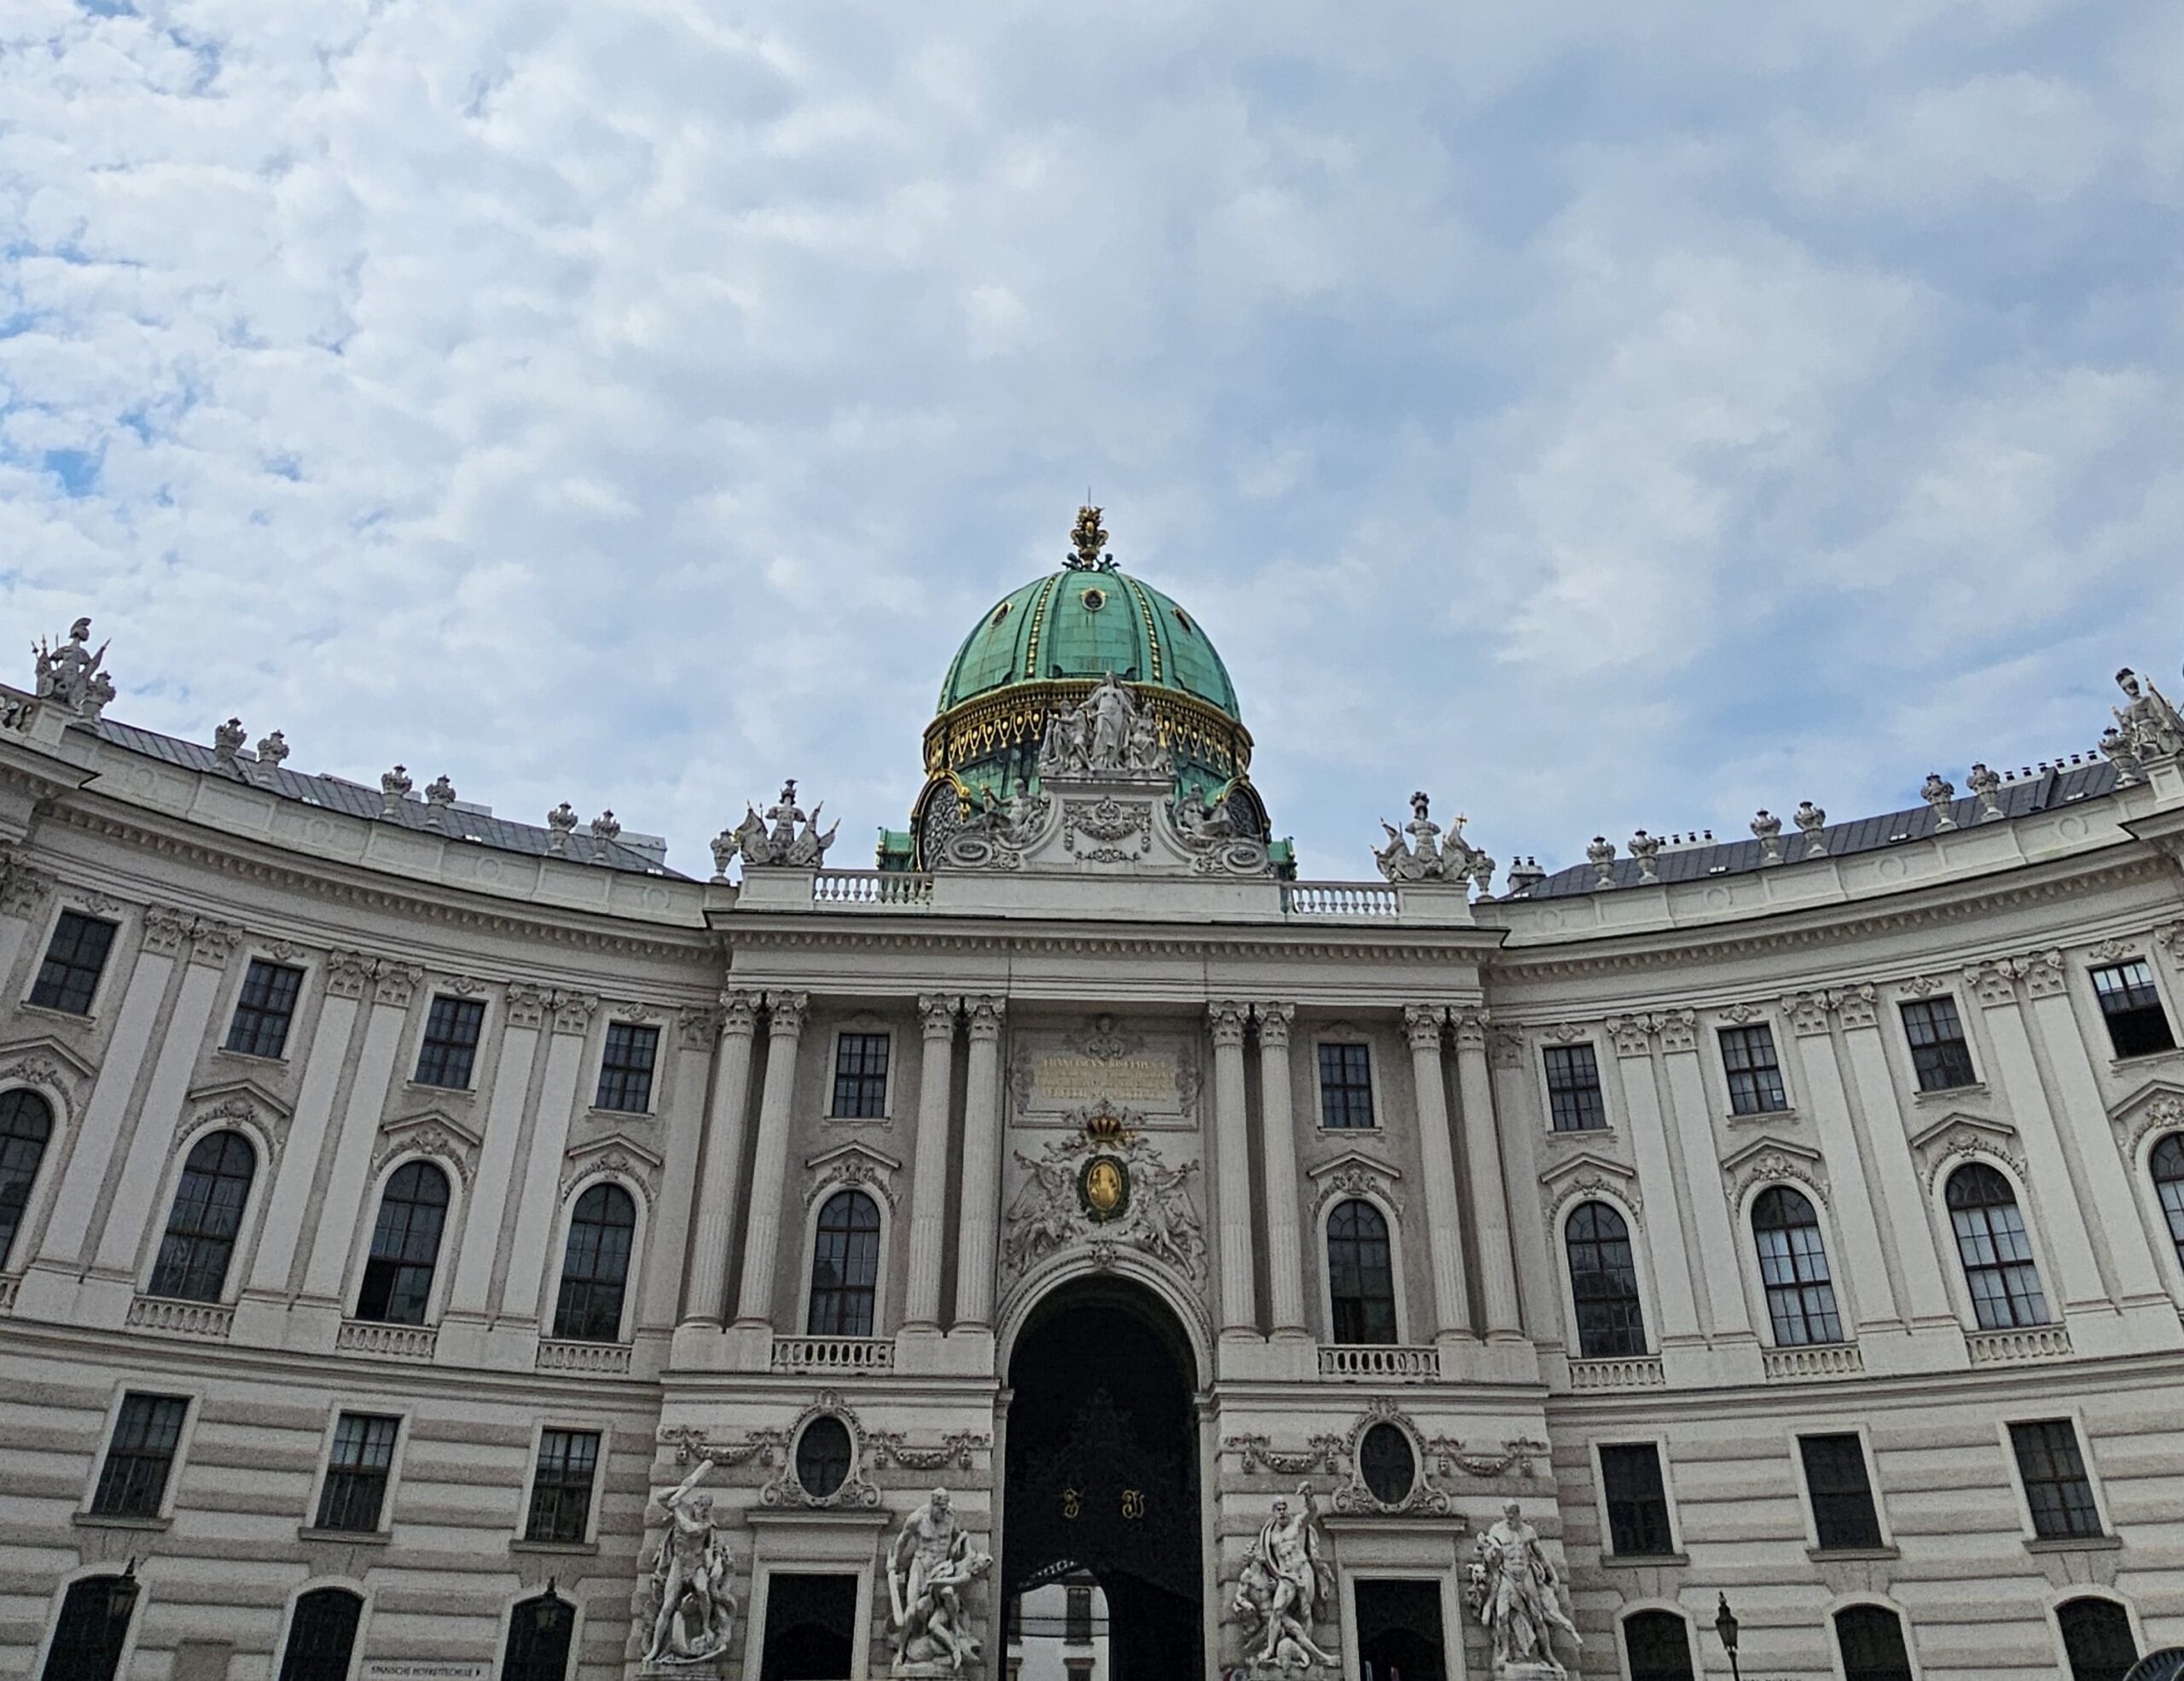 Hofburg Vienna, St Michael entrance. It has a green dome with gold work on it.